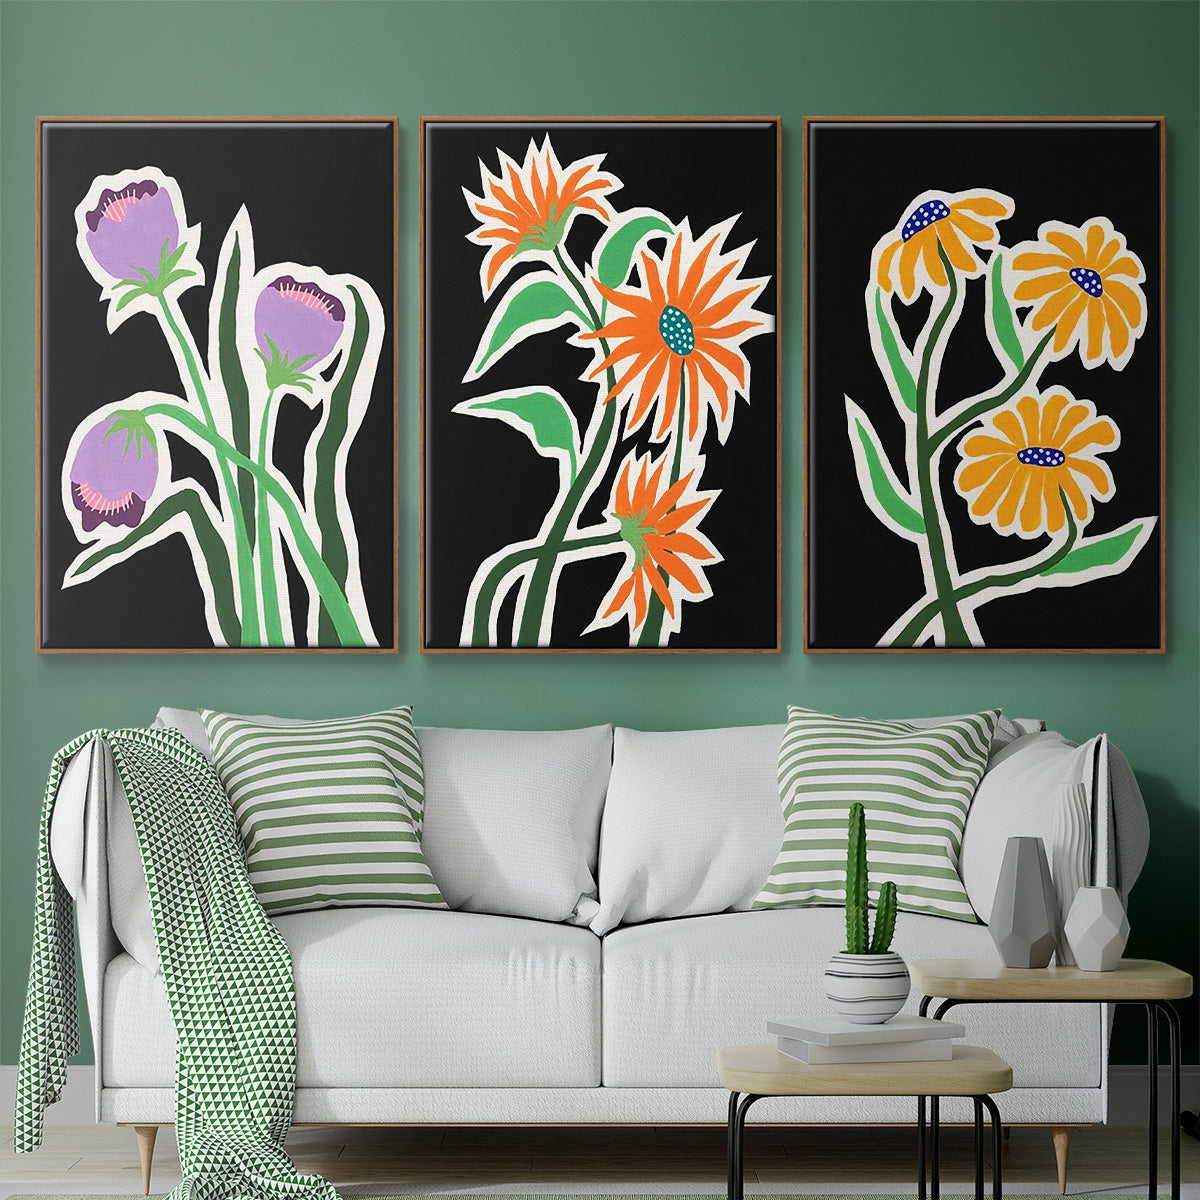 Pop Flowers I - Framed Premium Gallery Wrapped Canvas L Frame 3 Piece Set - Ready to Hang